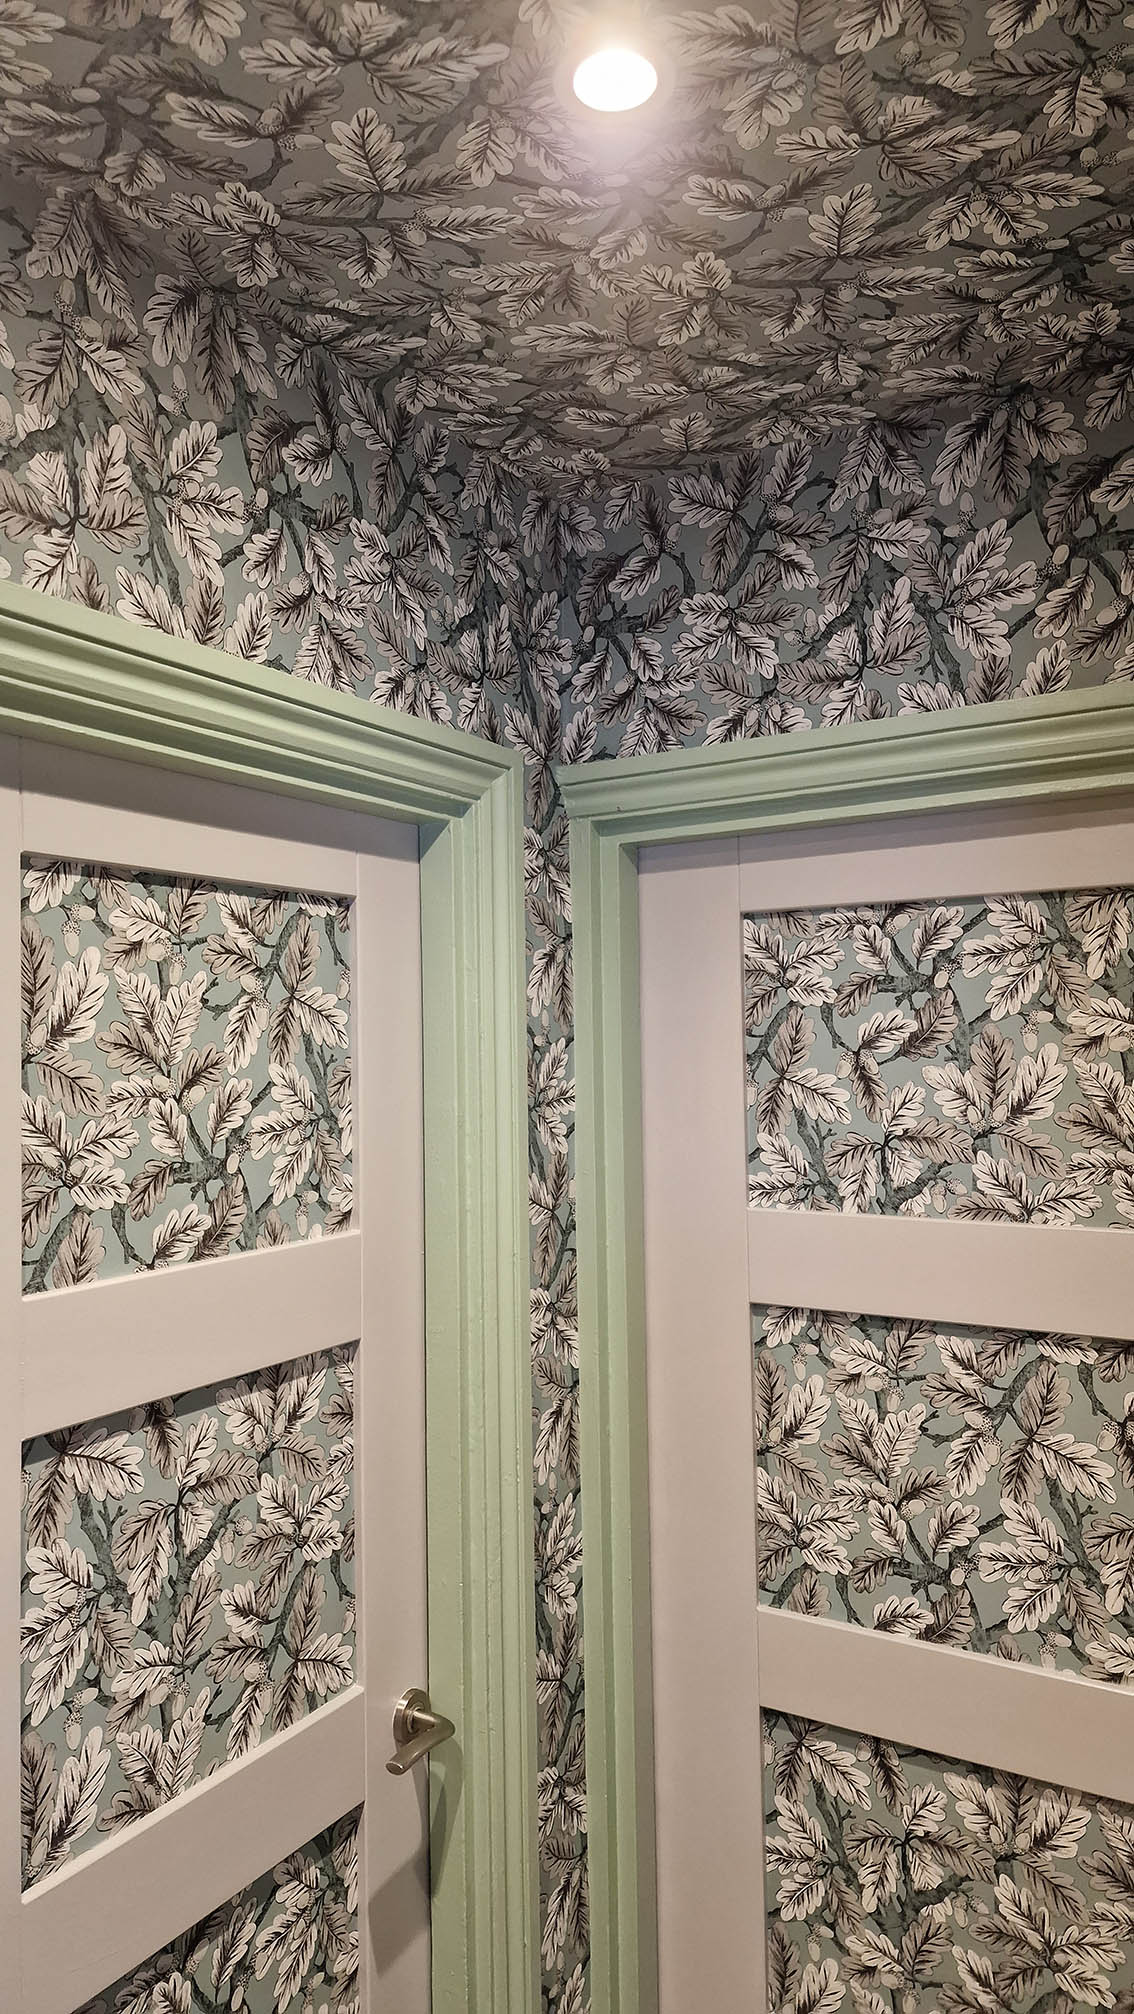 Leaves patterned wallpaper installed by Bluespec Decorating Limited wallpaper specialists on a ceiling, walls and door frames. There are two doors and a corner between them.